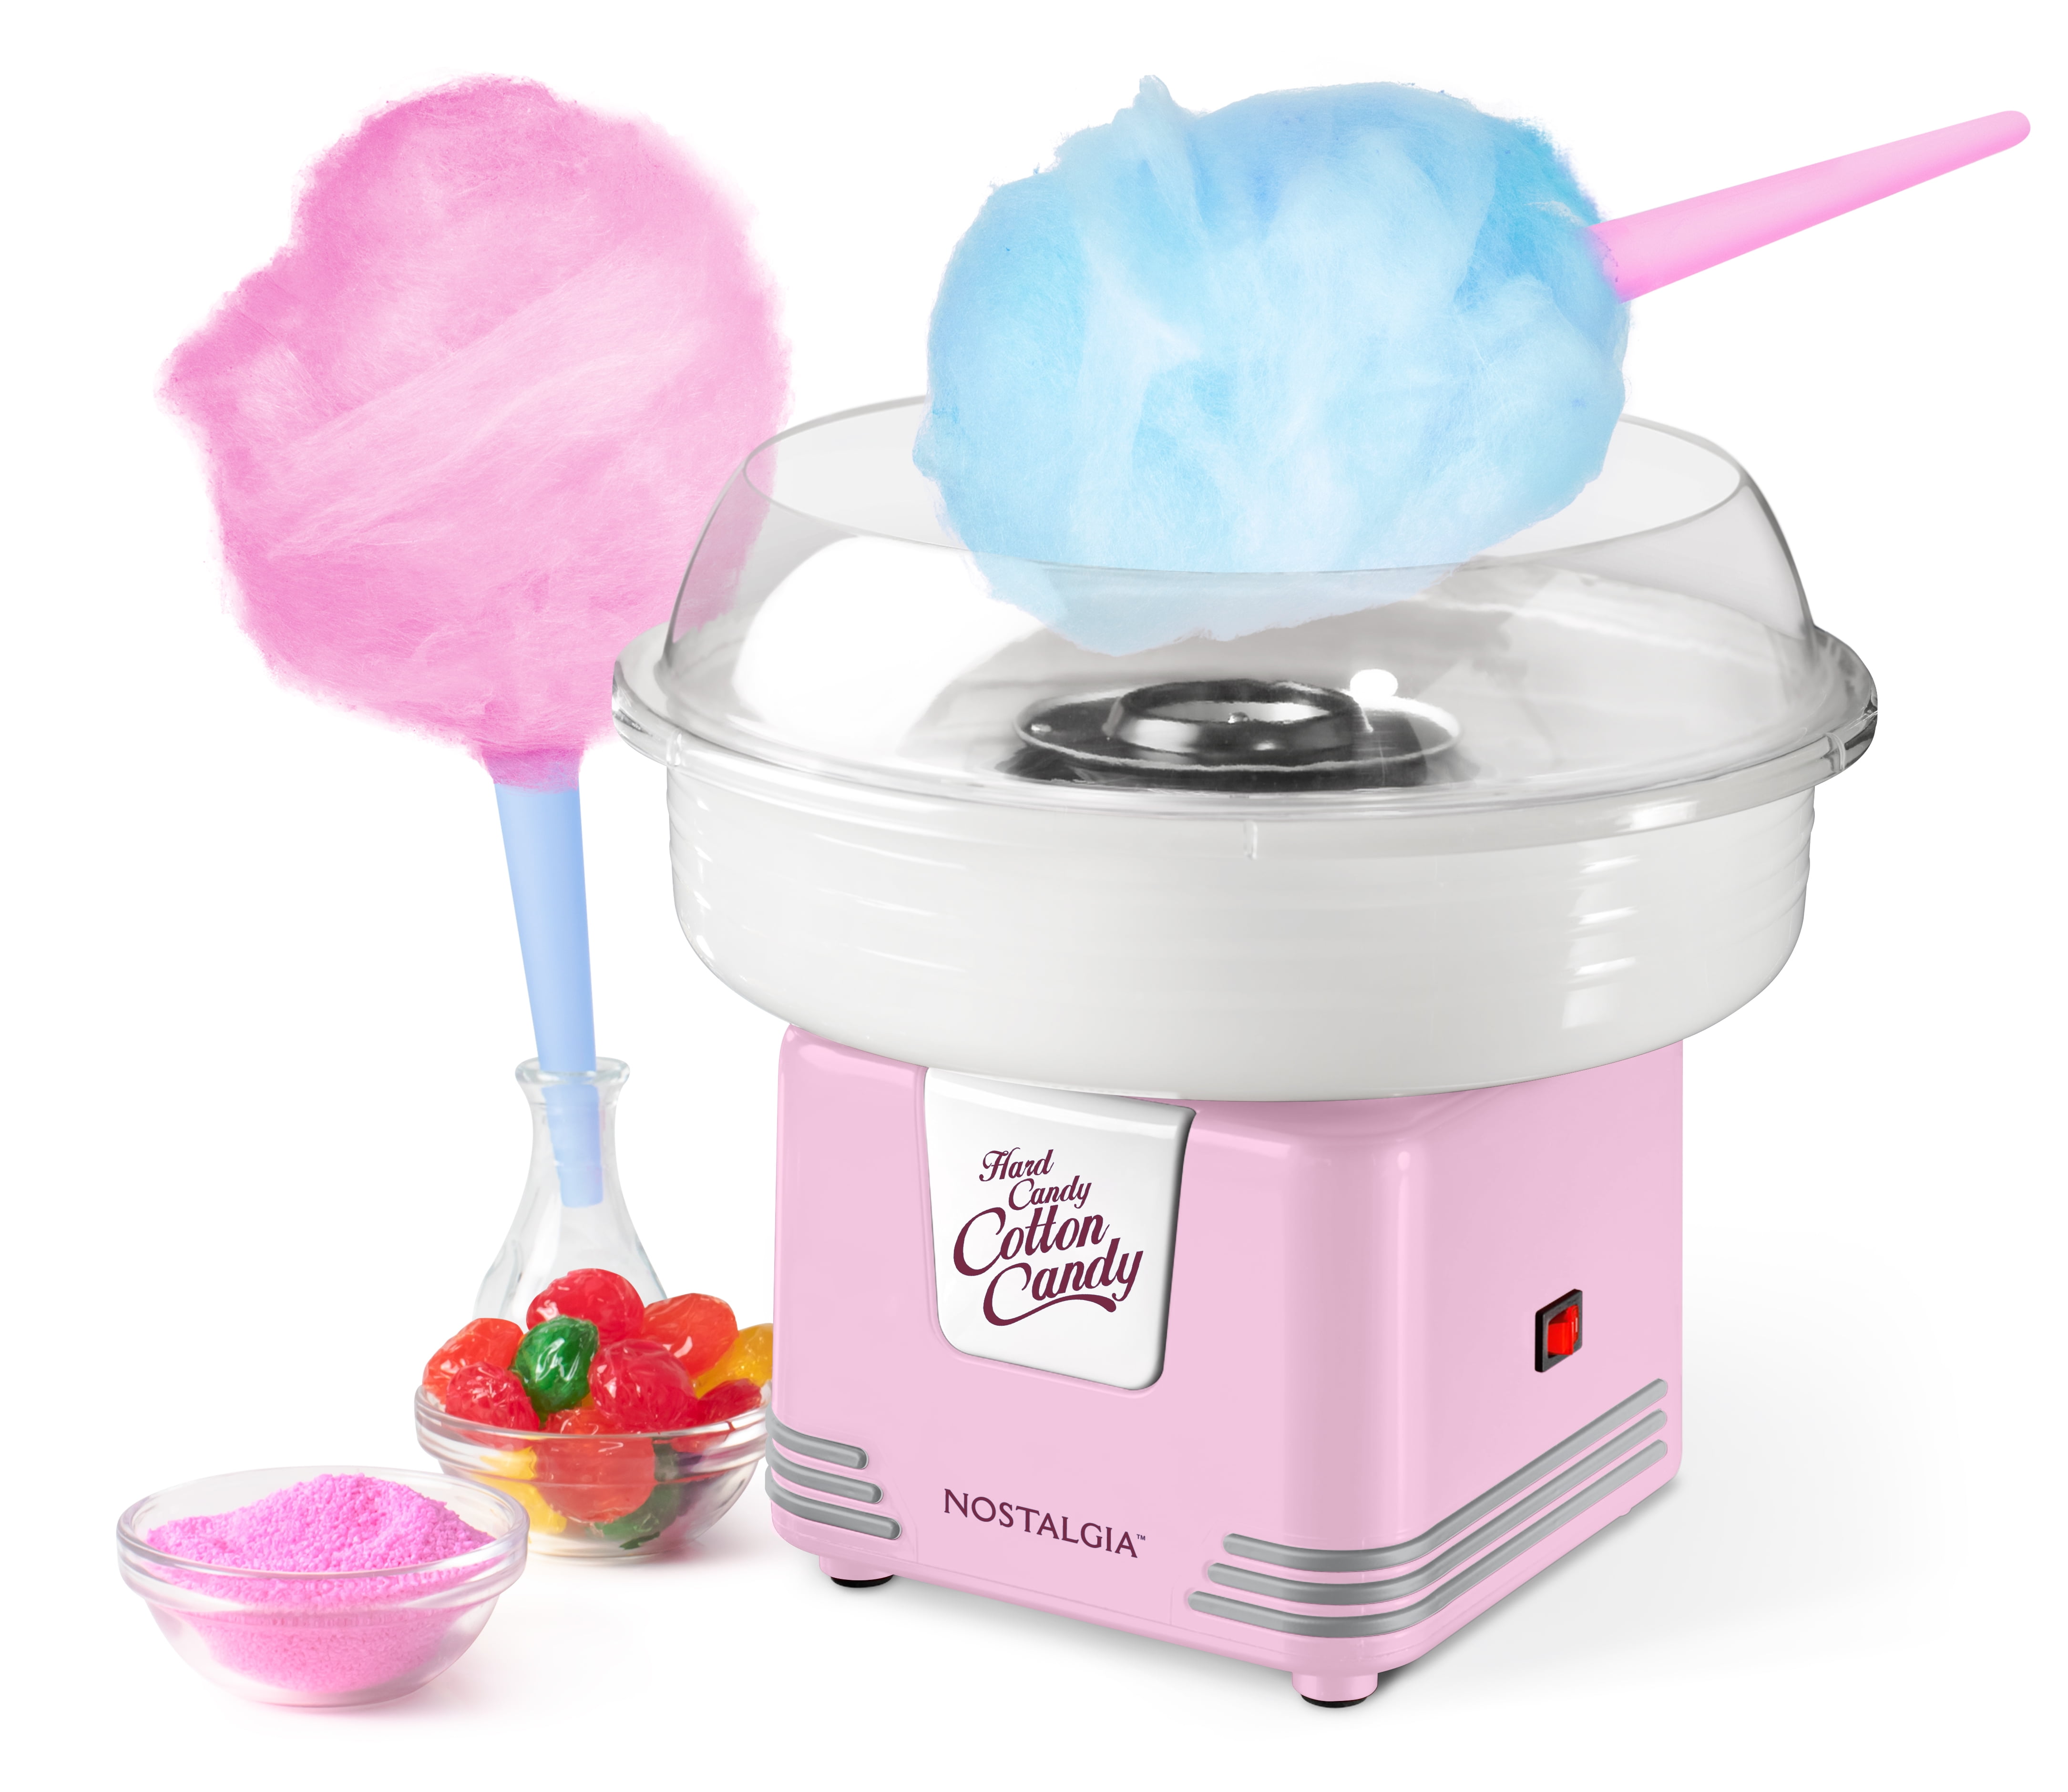 candy machine cotton candy cones candy floss cones paragon cotton candy cones